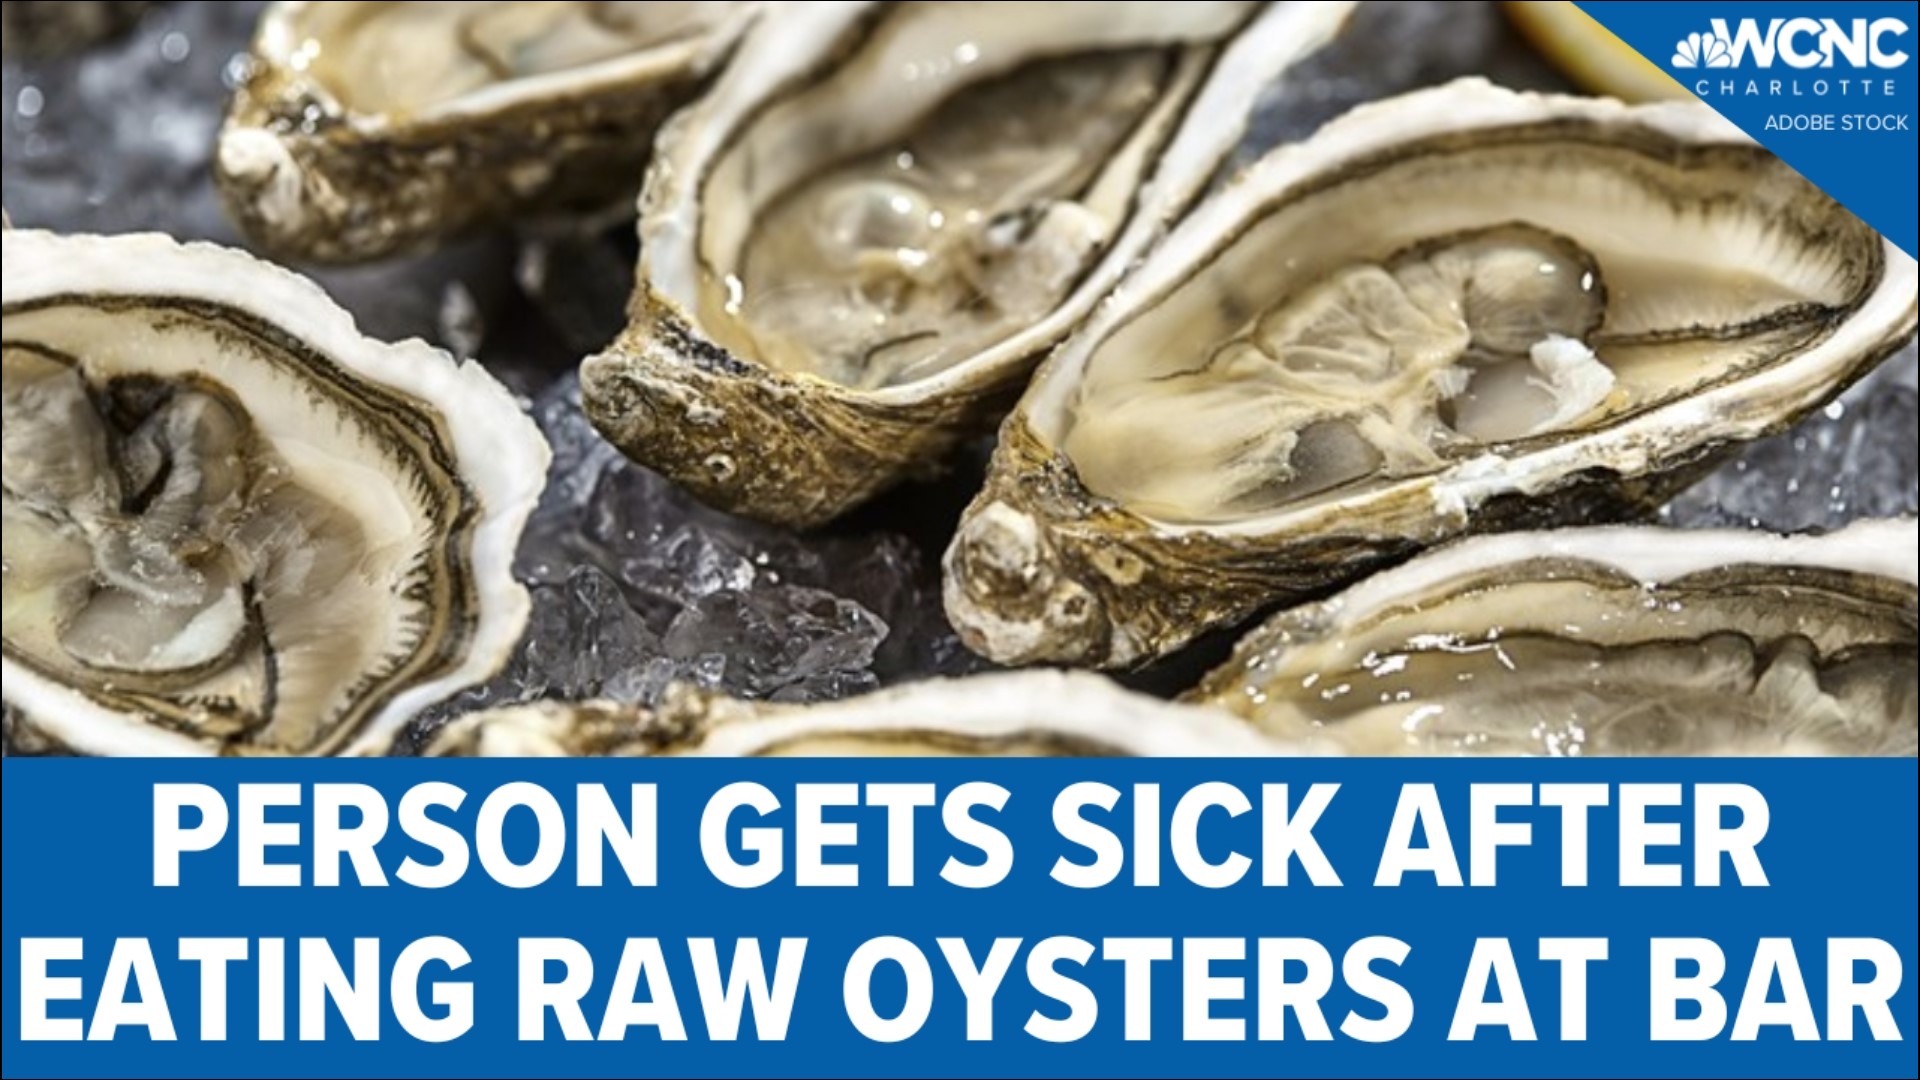 According to Mecklenburg County Public Health, the person was diagnosed with vibriosis after likely eating oysters at Fairweather, a nonregulated bar.